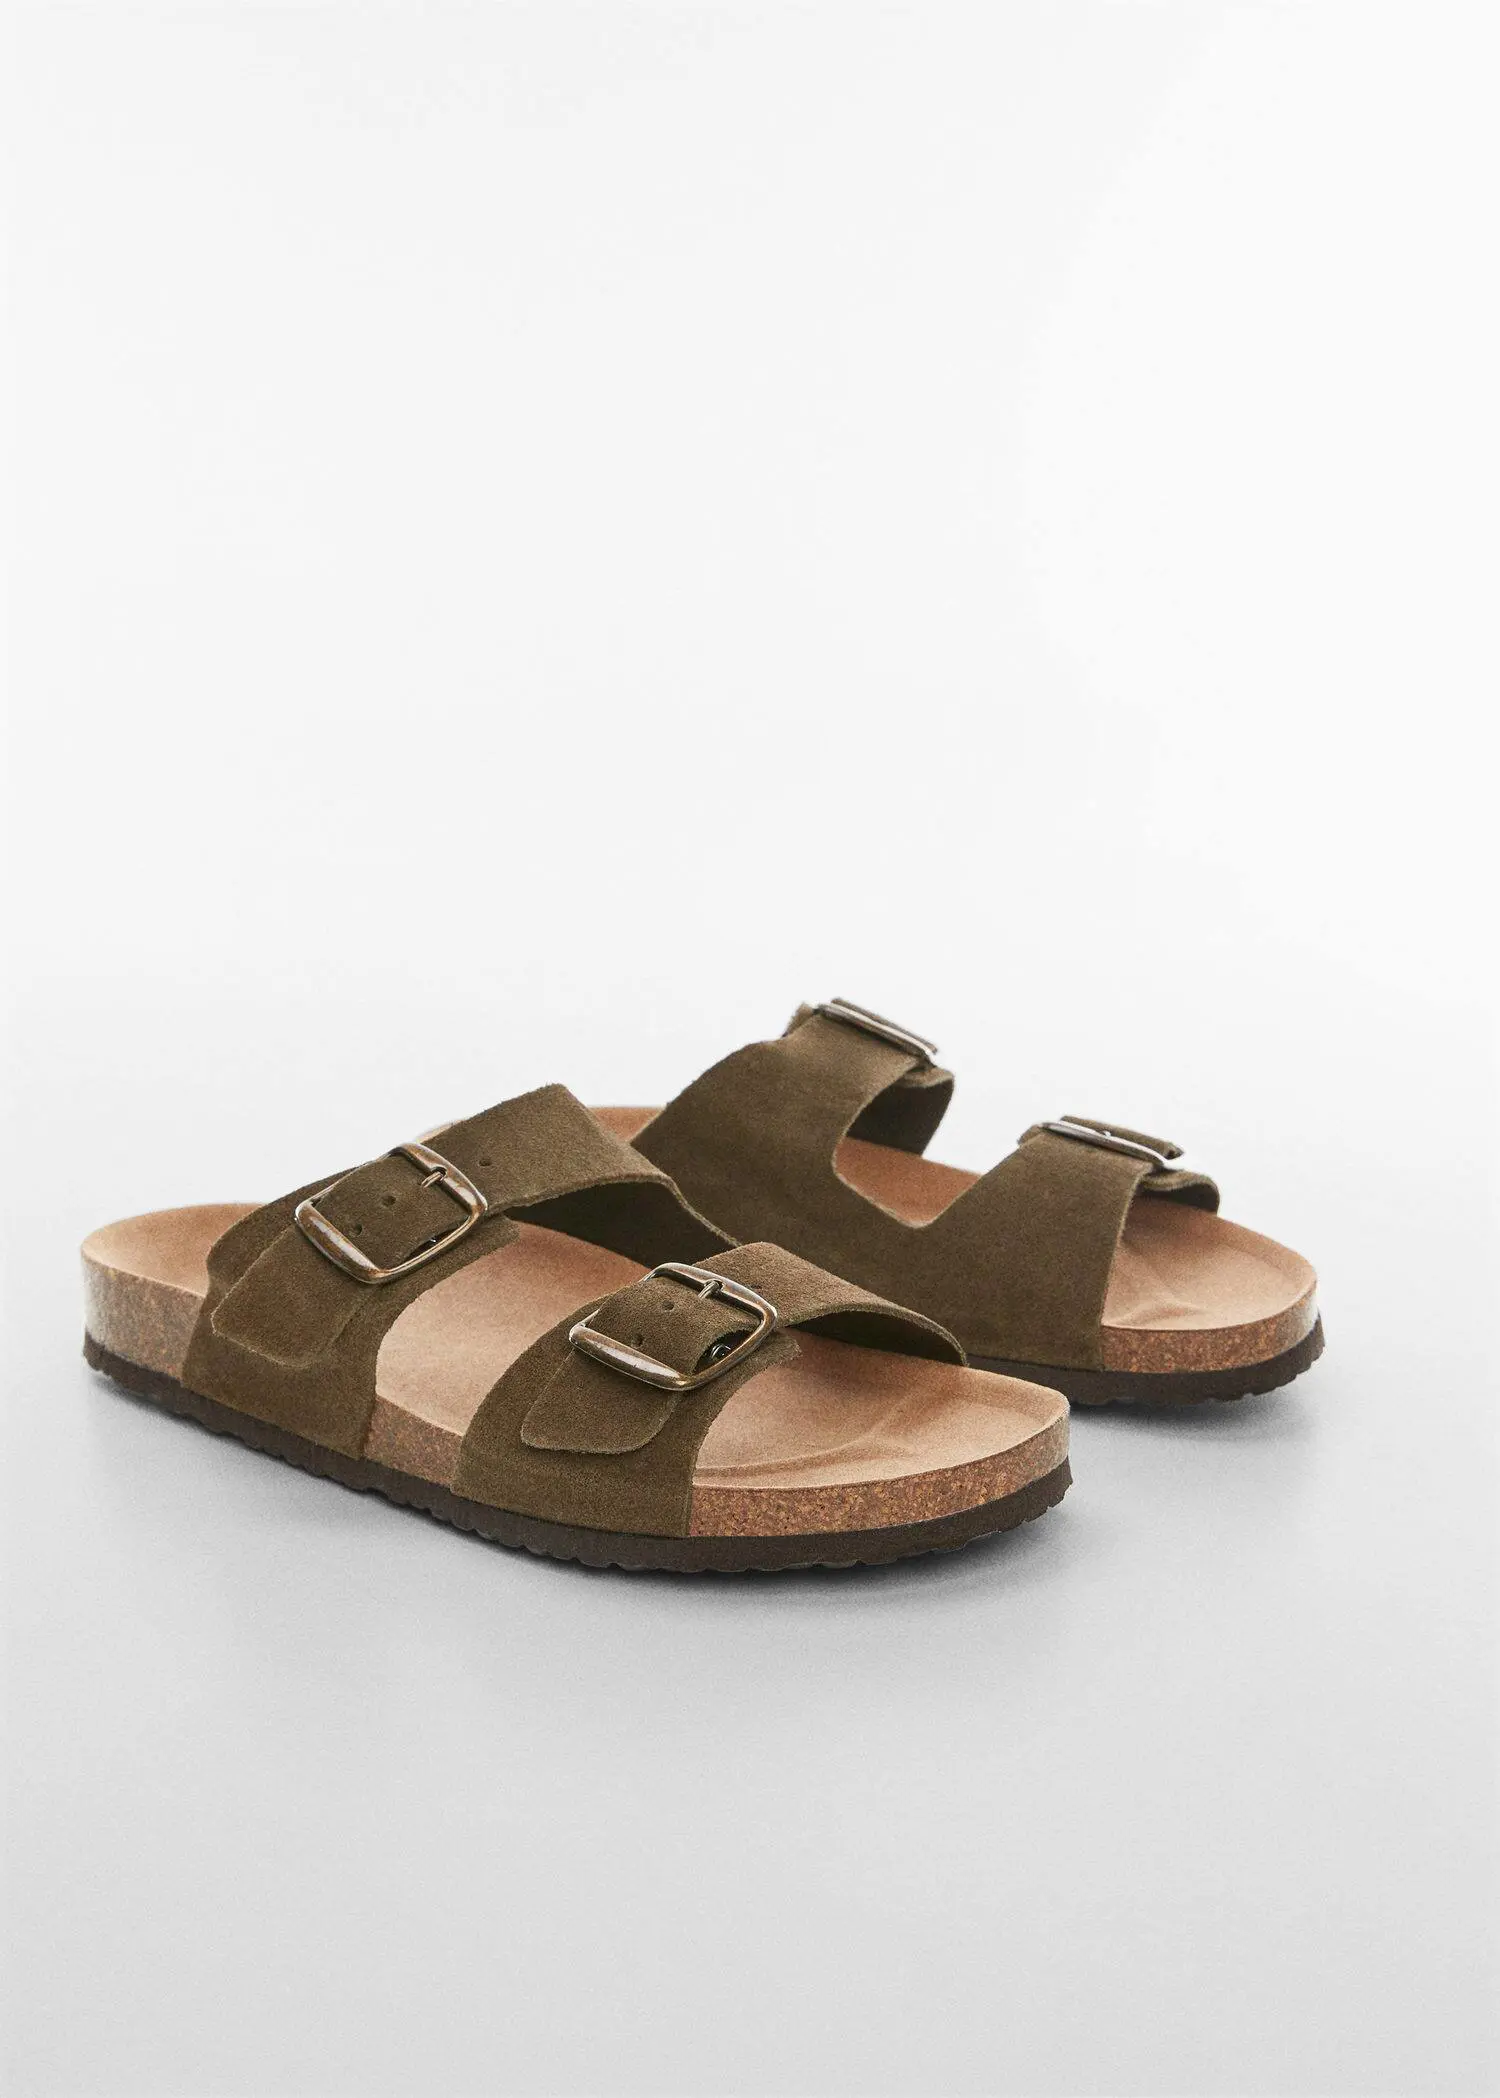 Mango Split leather sandals with buckle. a pair of brown sandals on top of a white surface. 